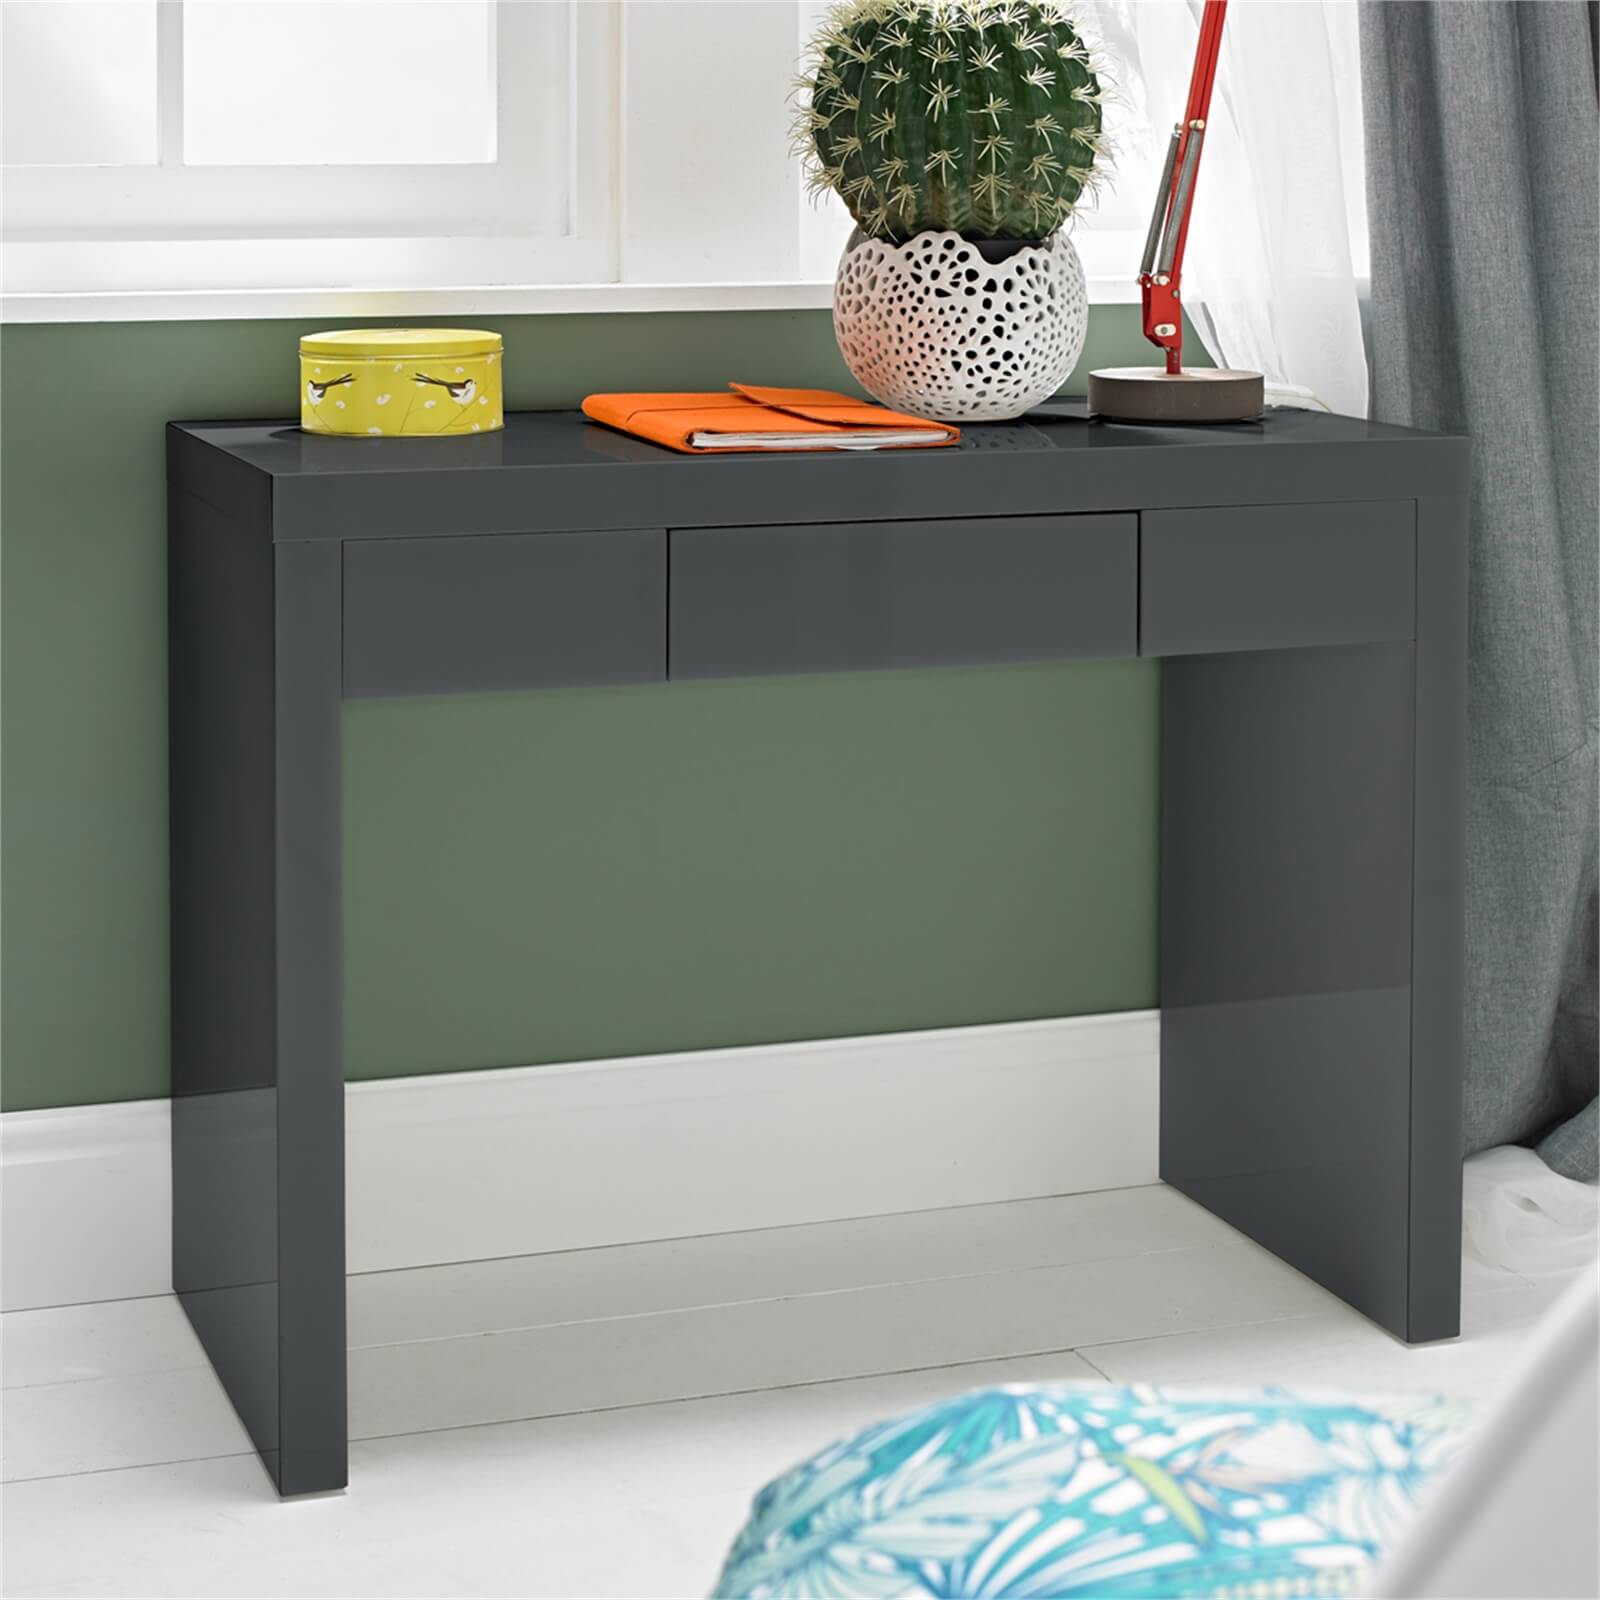 Puro Dressing Table - Charcoal